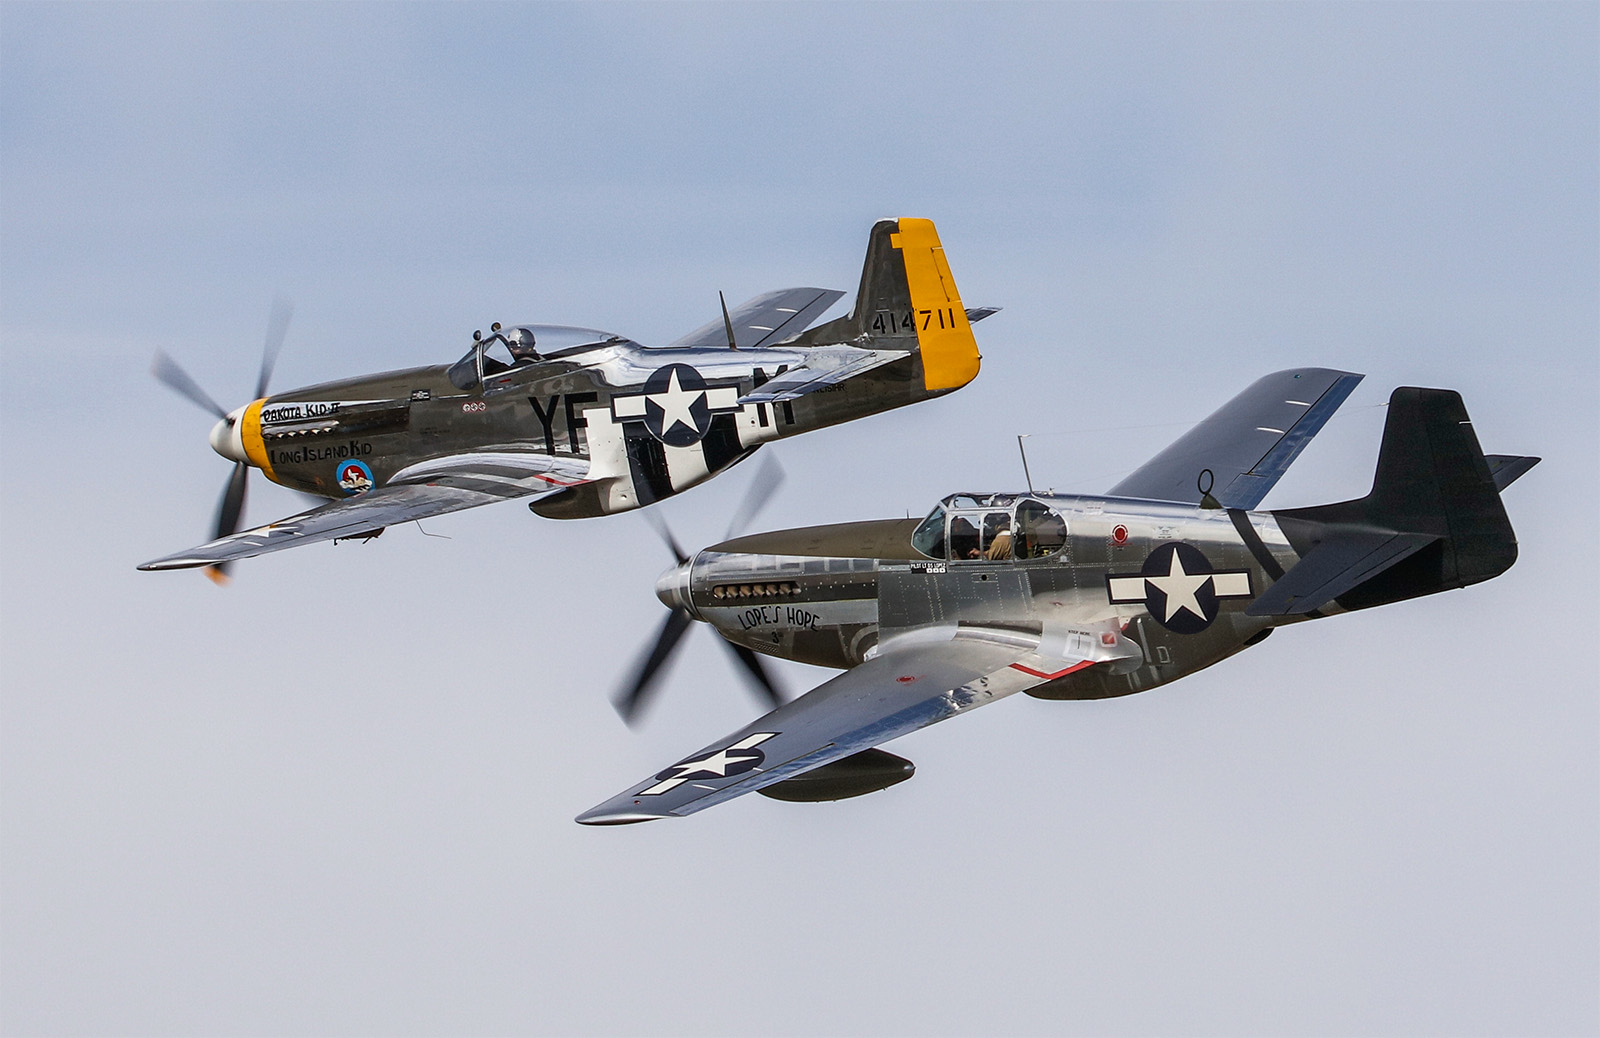 Lopes Hope 3rd in close formation with the P-51D chase plane for the test flight, TFLM's Dakota Kid. (photo by Randy Ruttger via AirCorps Aviation)